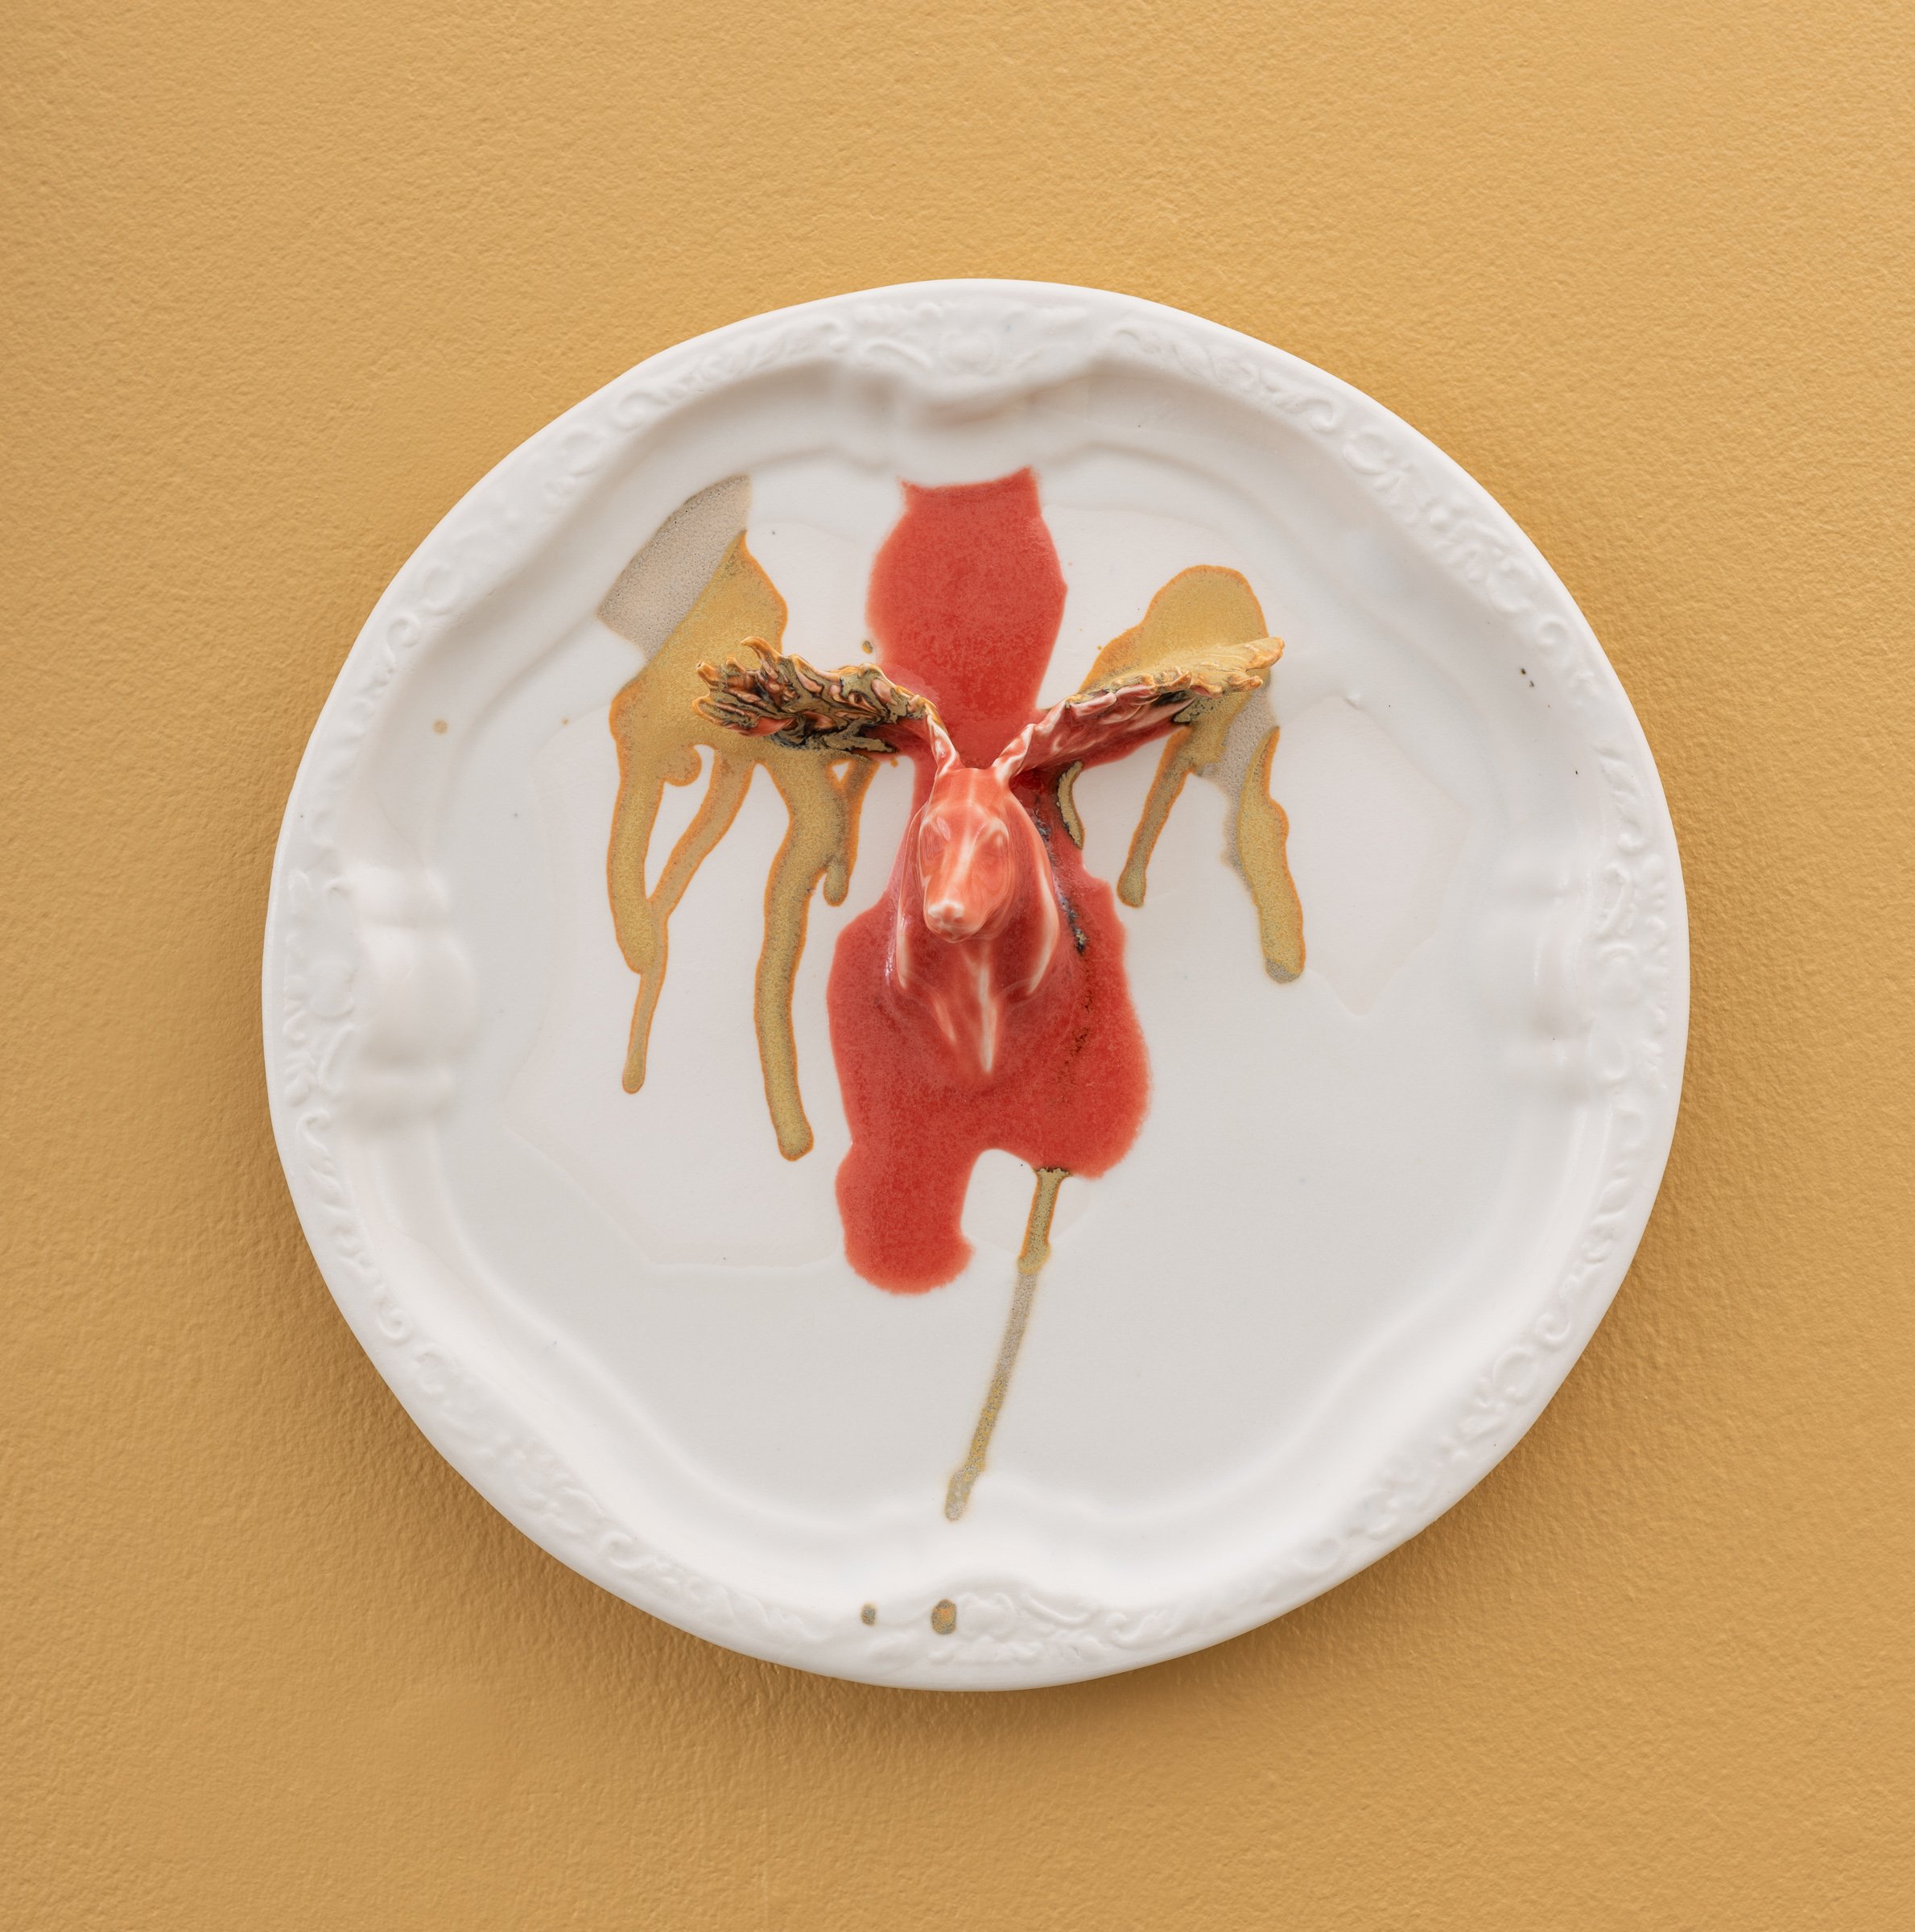  Why do Europeans put plates on their walls? XII | 2022  Porcelain, glazes, porcelain decals and tissue paper, press molding. 27x27x4cm  Photo: Thomas Tveter 